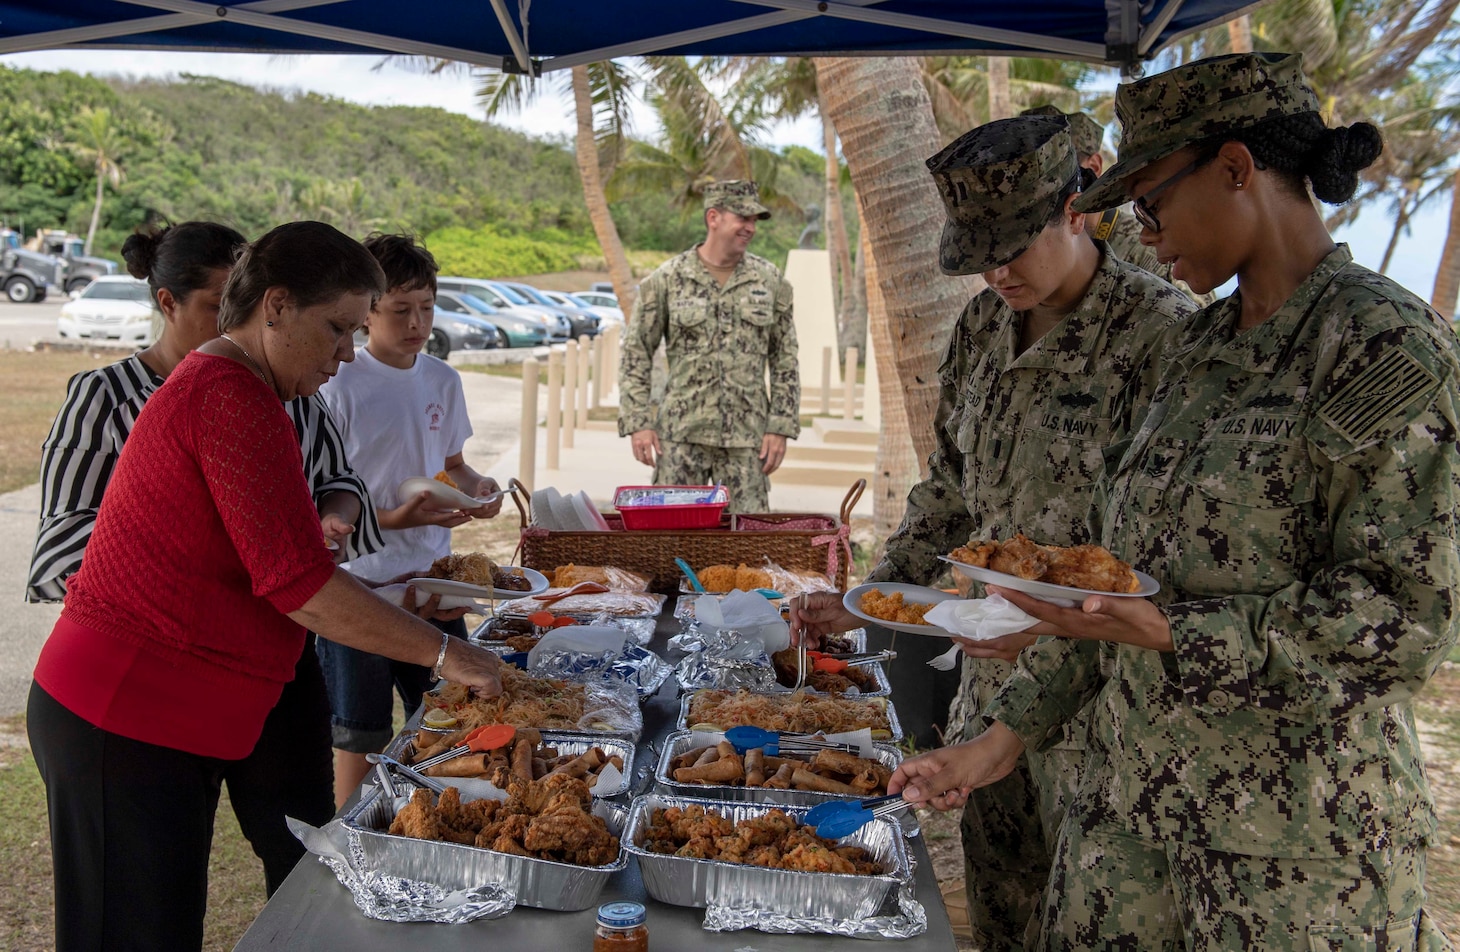 ASAN, Guam (June 20, 2019) Members of Seabee Betty’s family and Seabees assigned to Naval Mobile Construction Battalion 133, prepare to eat together during the Seabee Betty Day memorial celebration. Seabee Betty died June 9, 2003 and was interred June 20, 2003. In 2004, the governor of Guam declared June 20 to be Seabee Betty Day to honor the more than 50 years of dedicated service to the Seabee community on Guam.